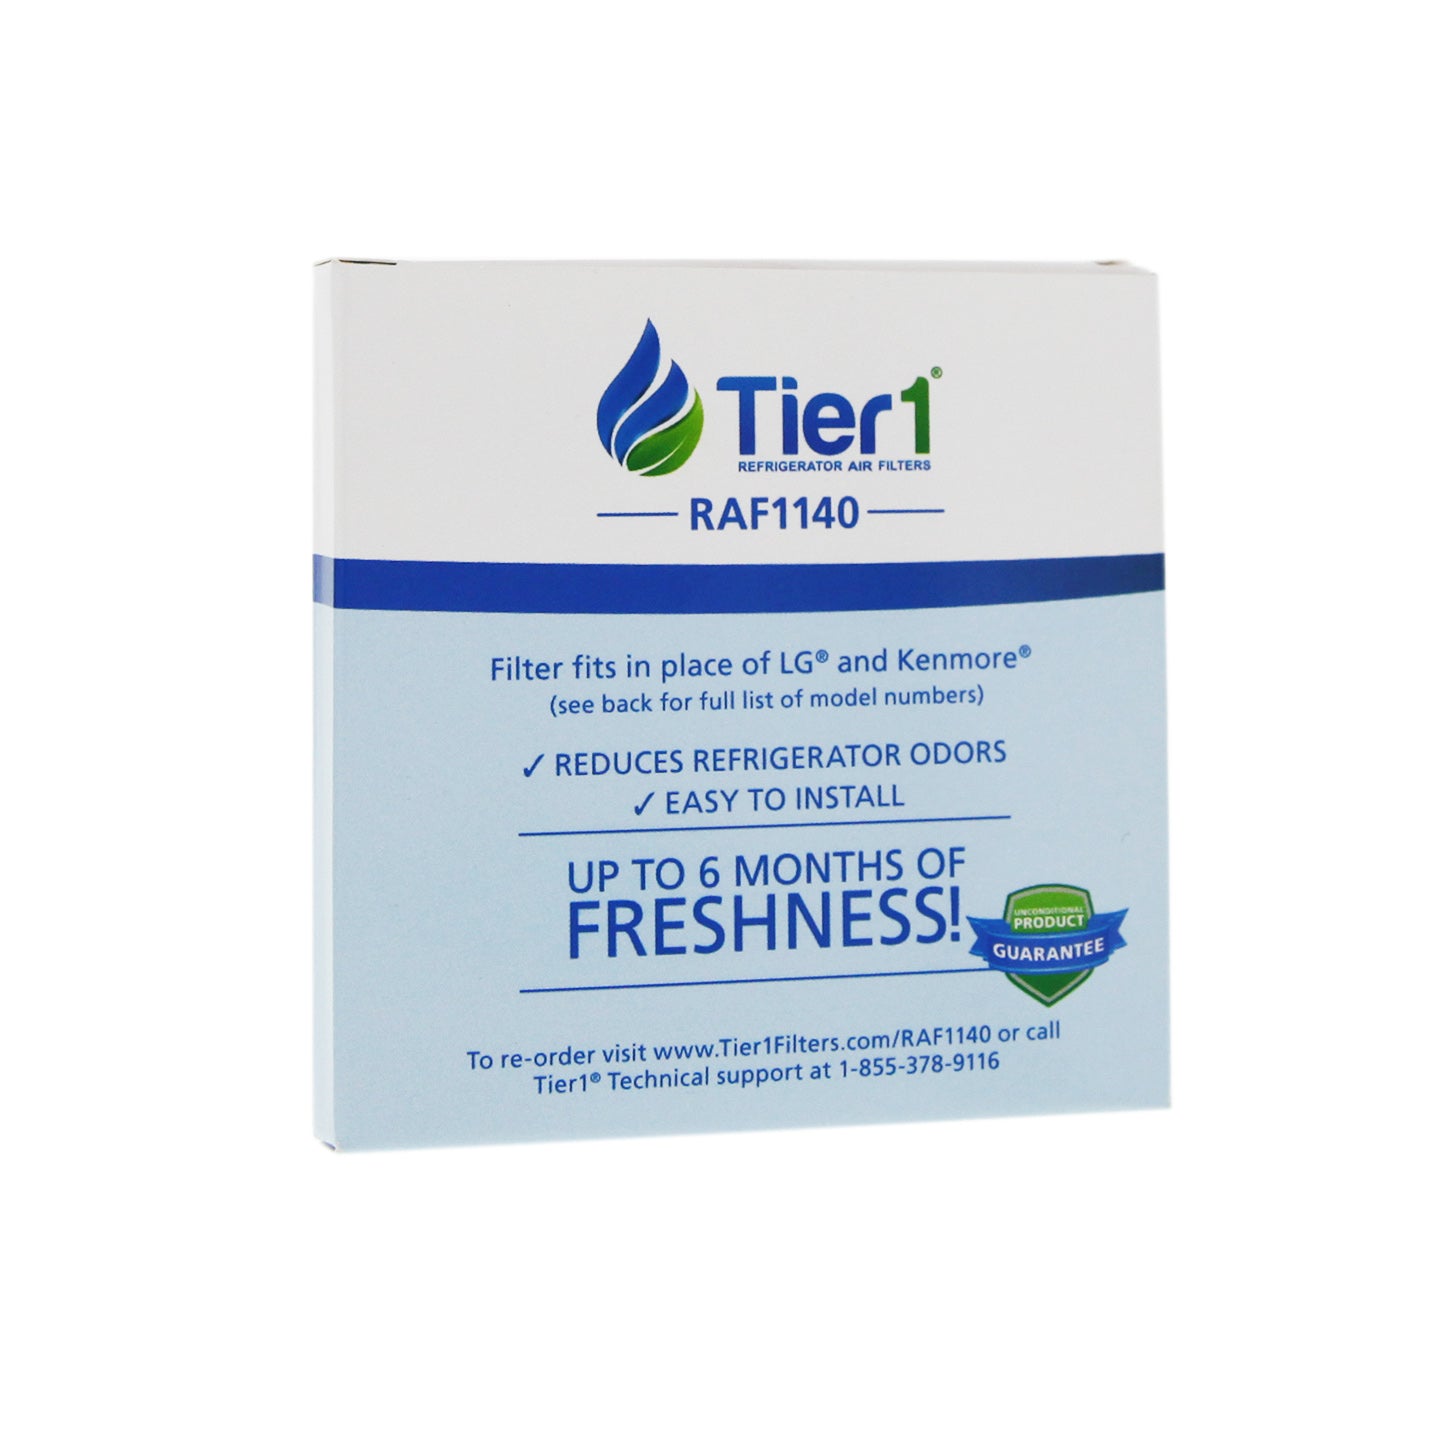 Tier1 RAF1140 Refrigerator Air Filter Replacement (LG LT120F Comparable)